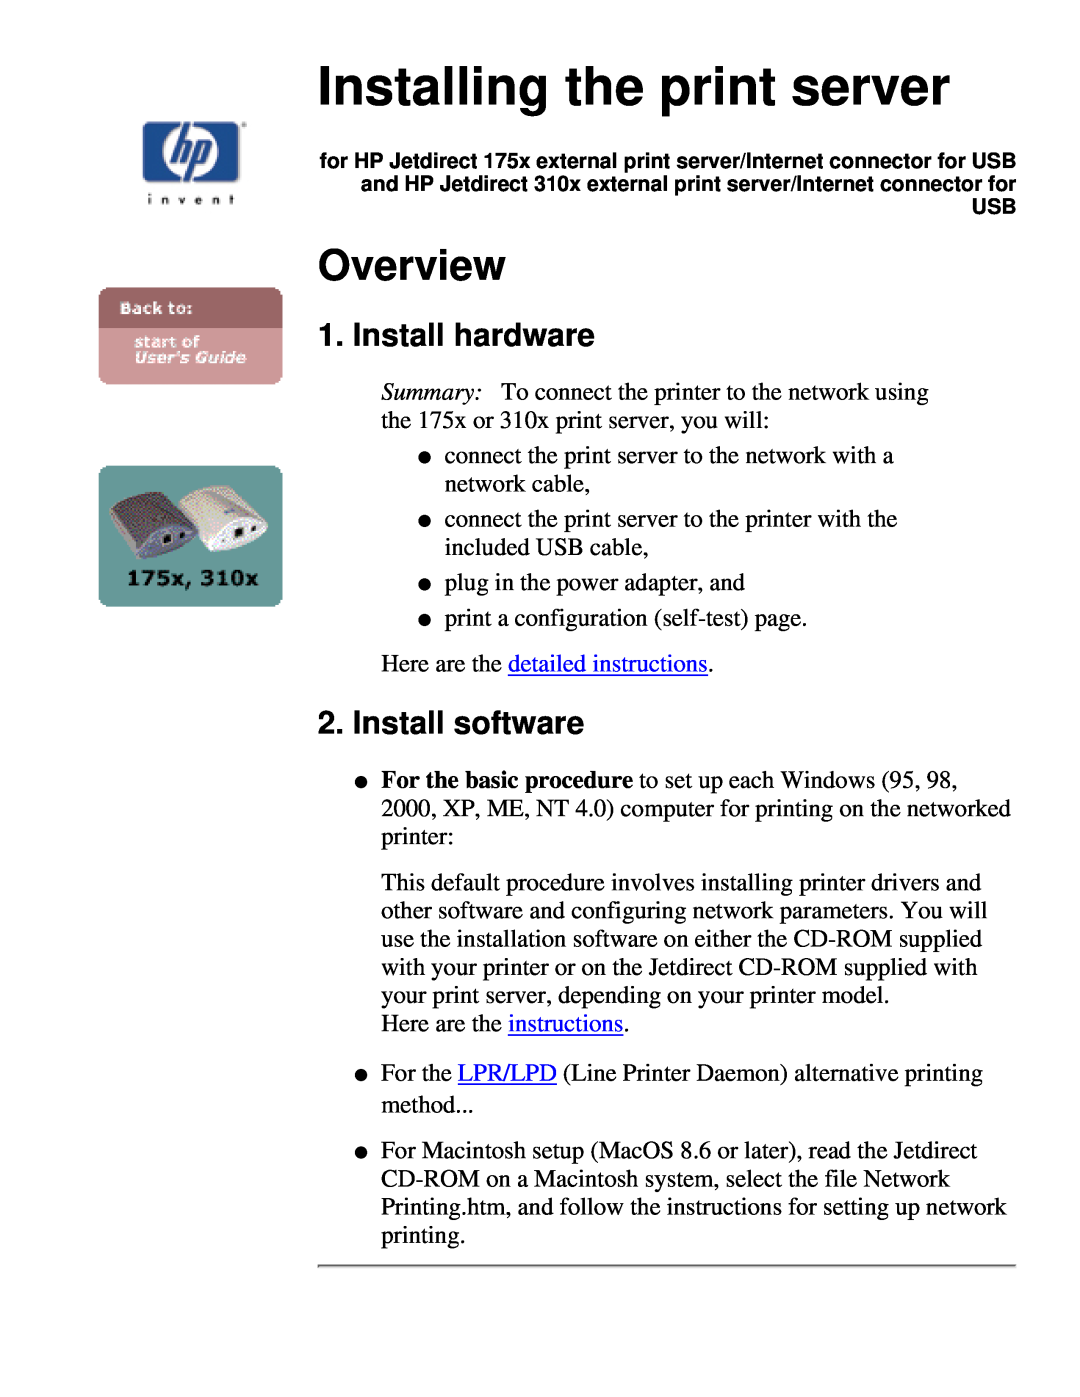 HP 310X Installing the print server, Overview, Install hardware, Install software, Here are the detailed instructions 